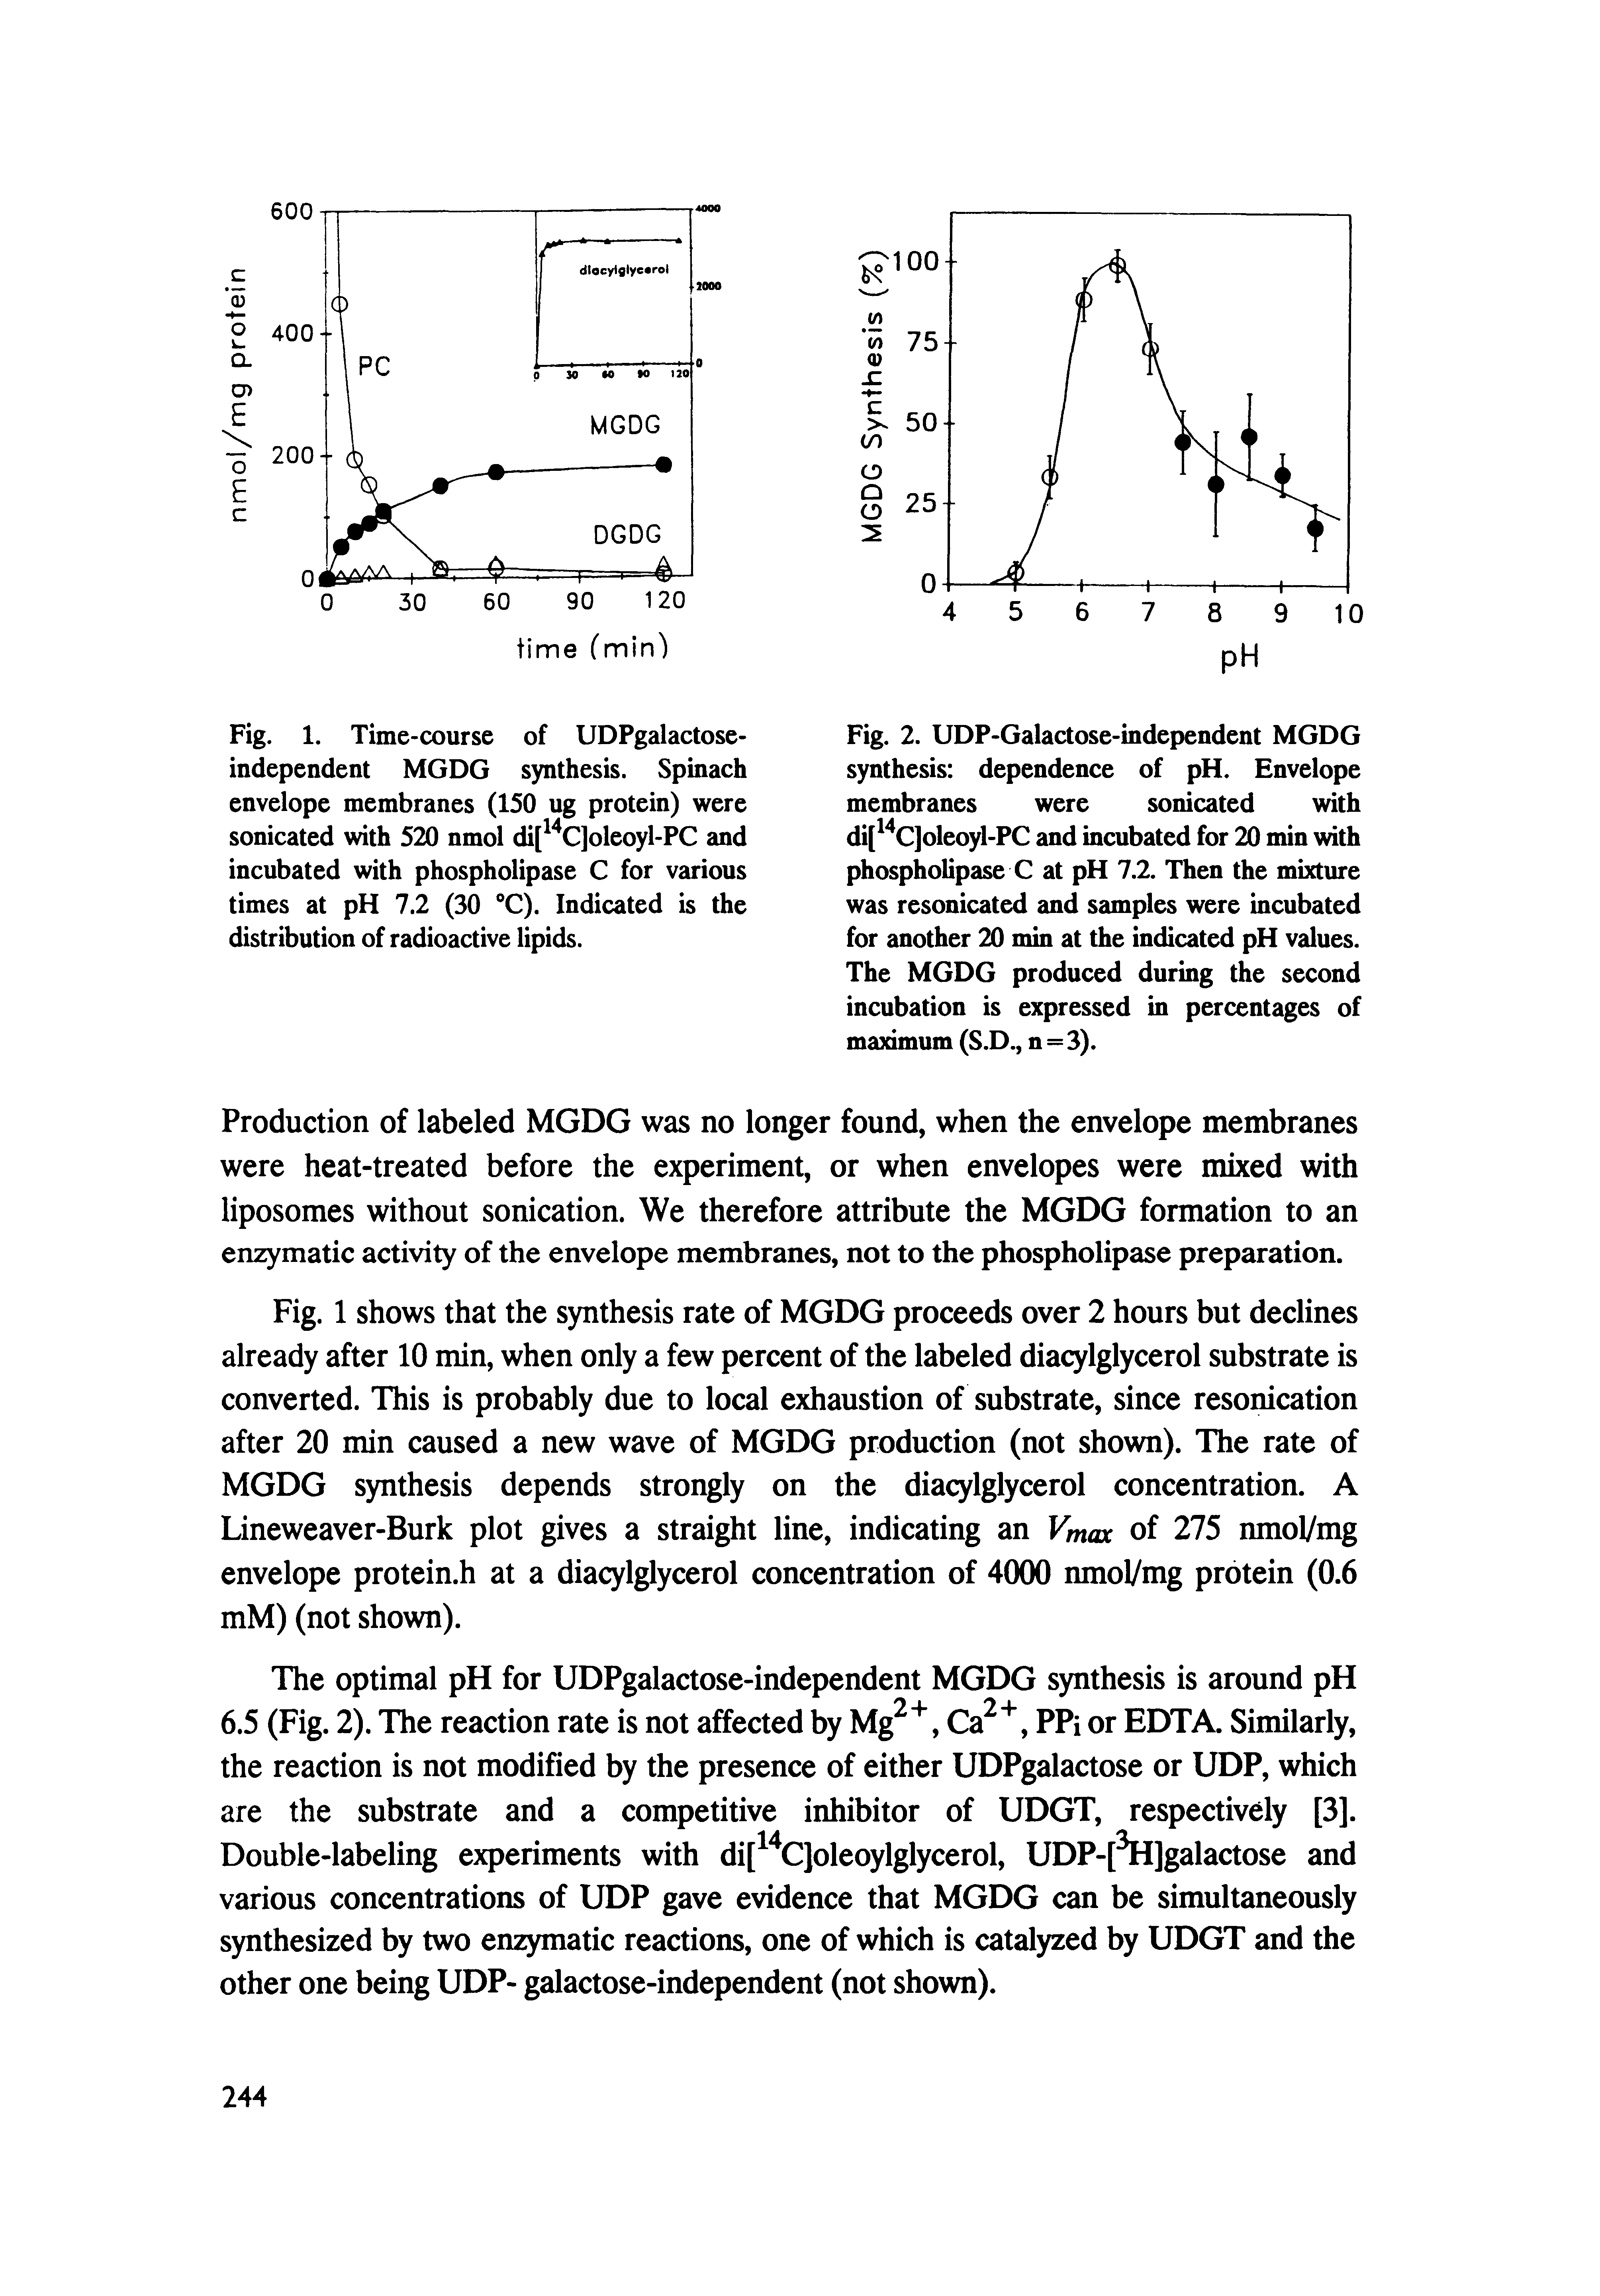 Fig. 1. Time-course of UDPgalactose-independent MGDG synthesis. Spinach envelope membranes (150 ug protein) were sonicated with 520 nmol di[ C]oleoyl-PC and incubated with phospholipase C for various times at pH 7.2 (30 C). Indicated is the distribution of radioactive lipids.